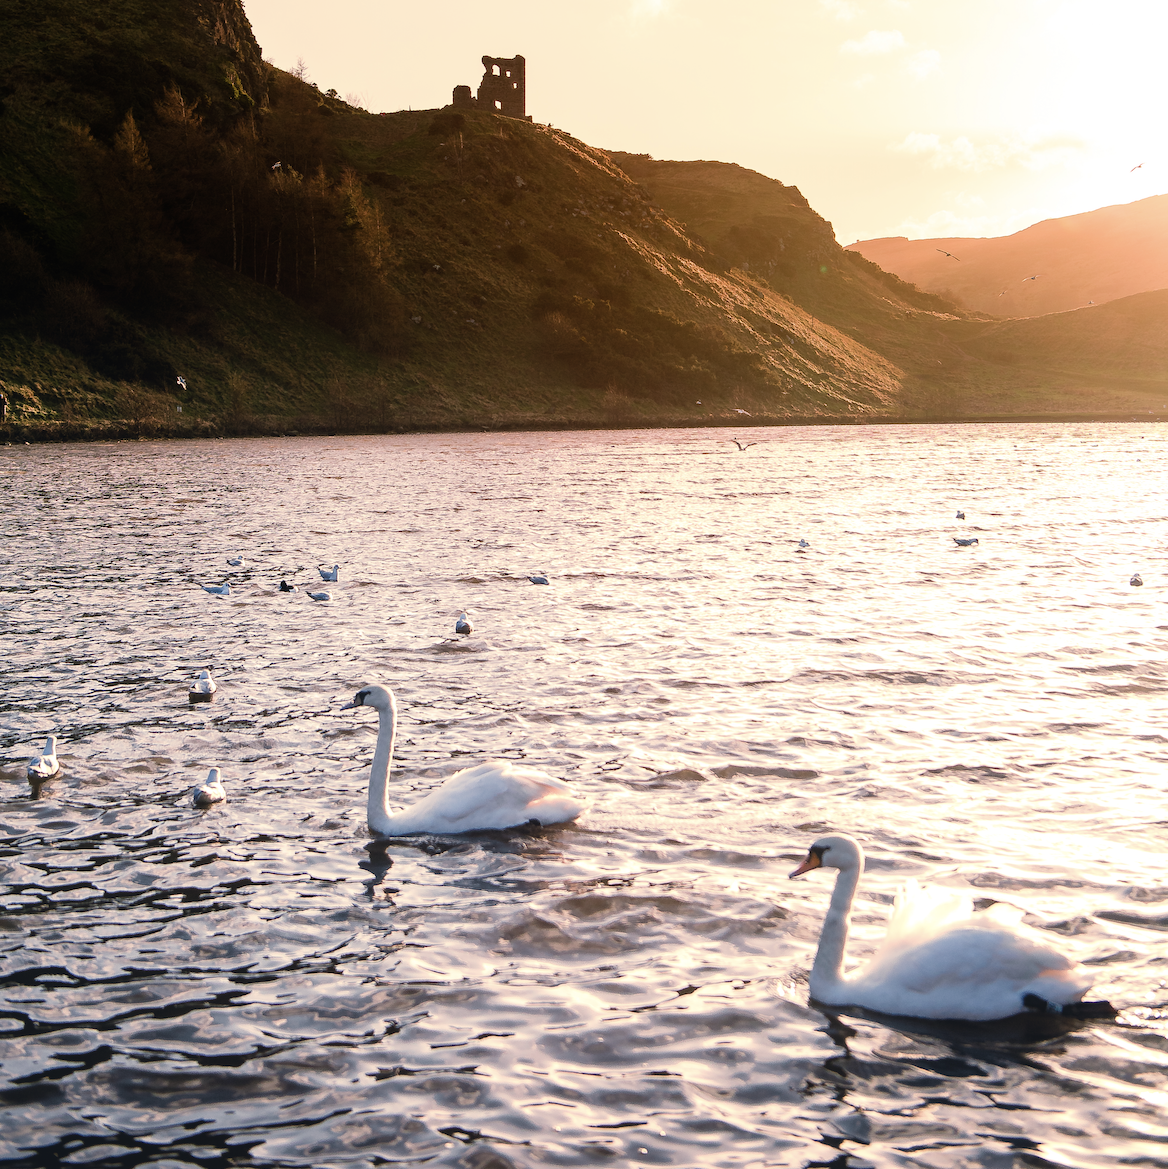 Two swans in a pond during sunrise, with stone church ruins on a hill in the background. Located at Arthur's Seat, Edinburgh, Scotland. 